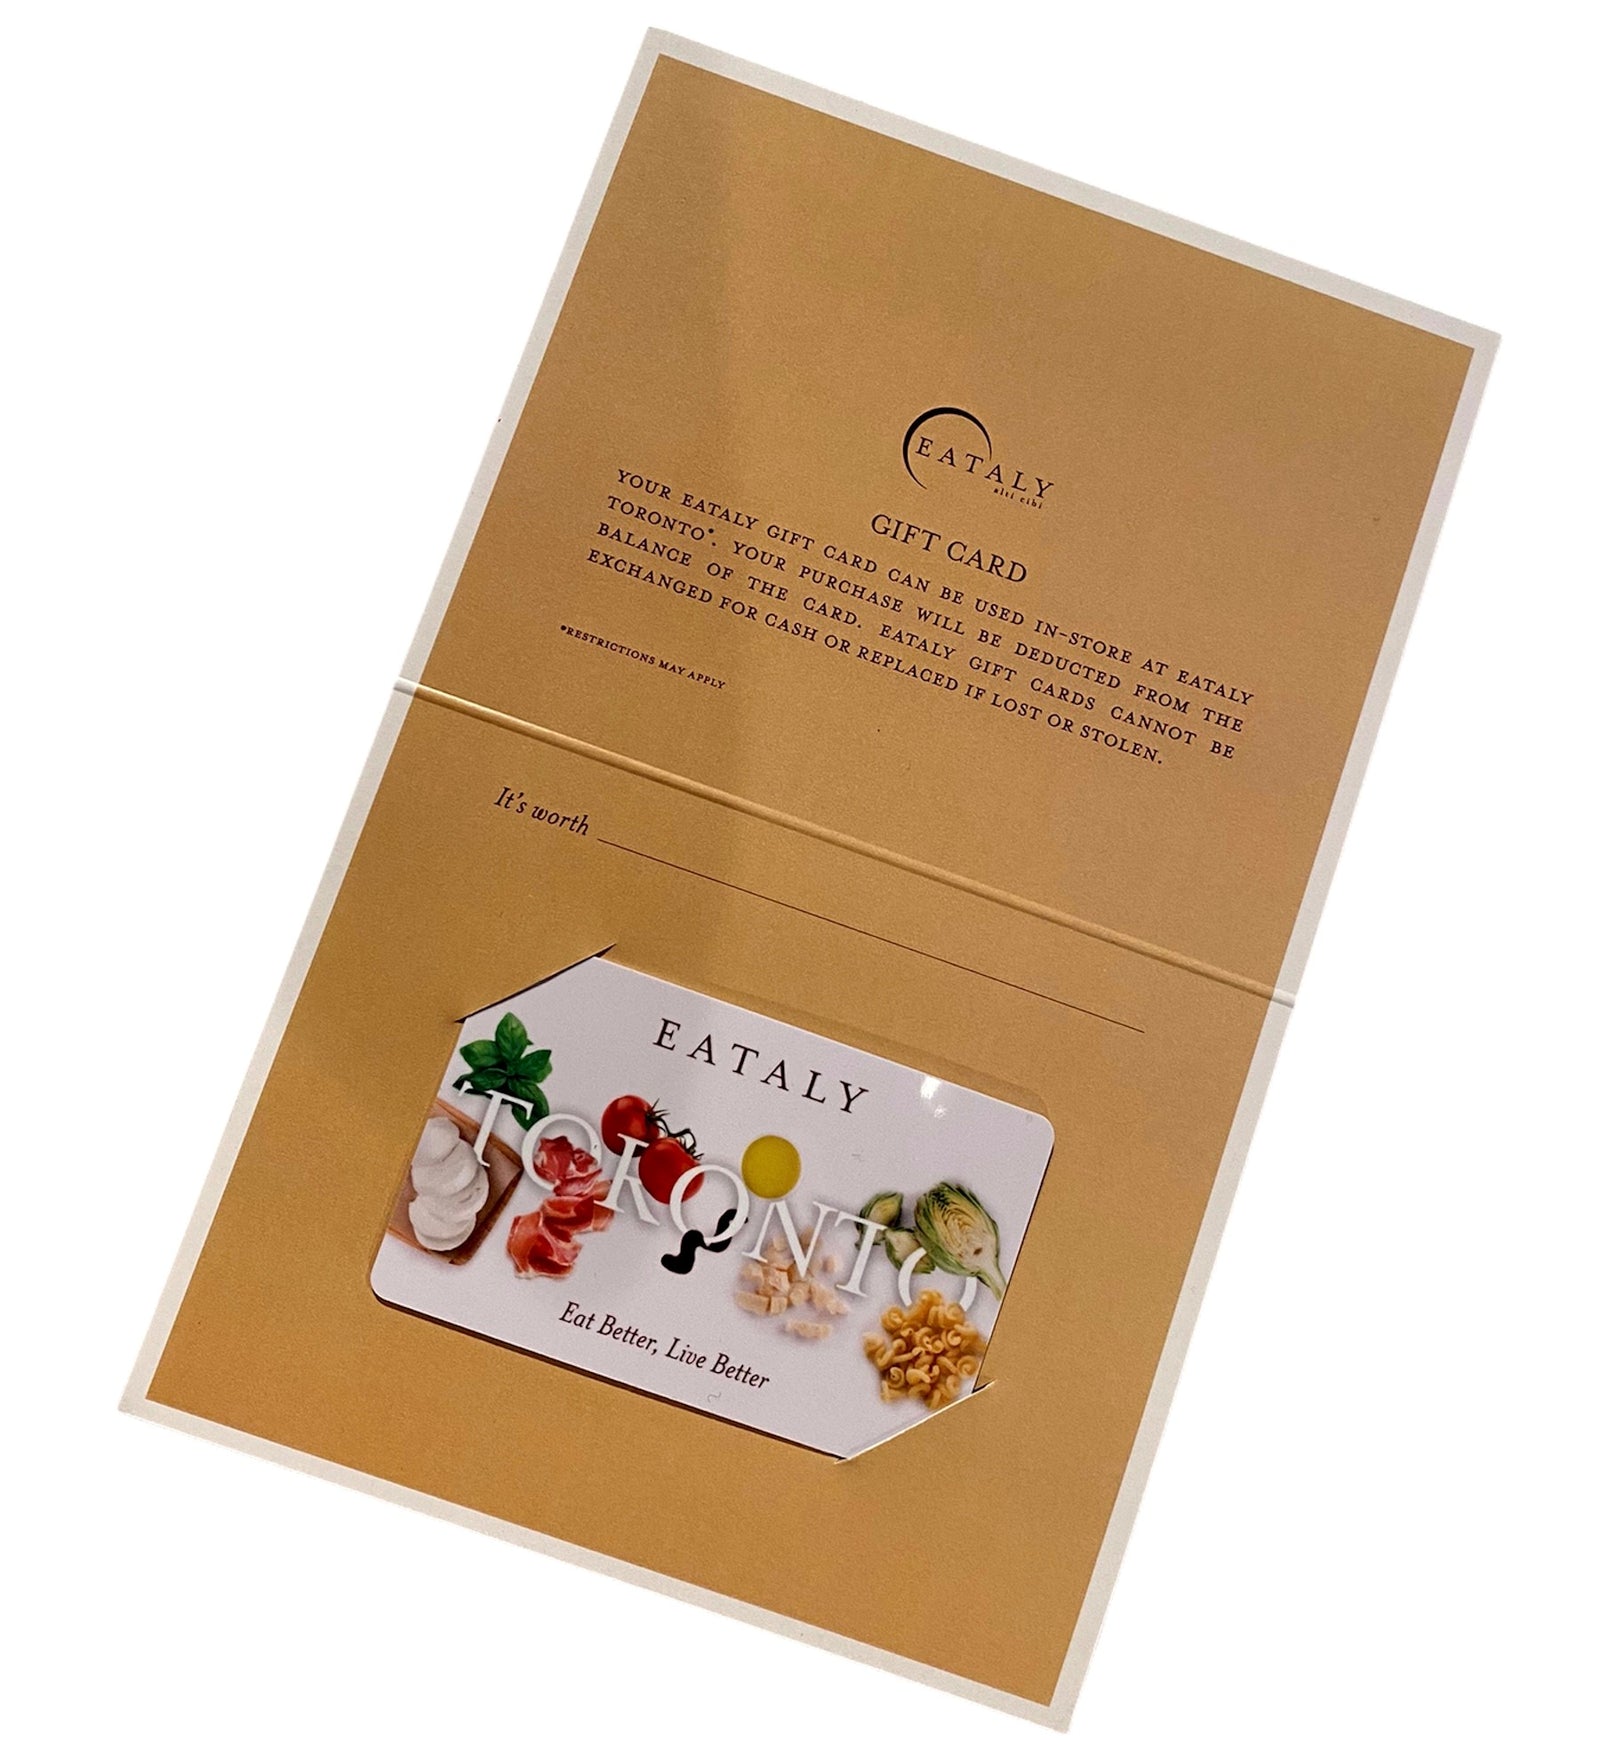 Instore Gift Card (Eataly Toronto only)